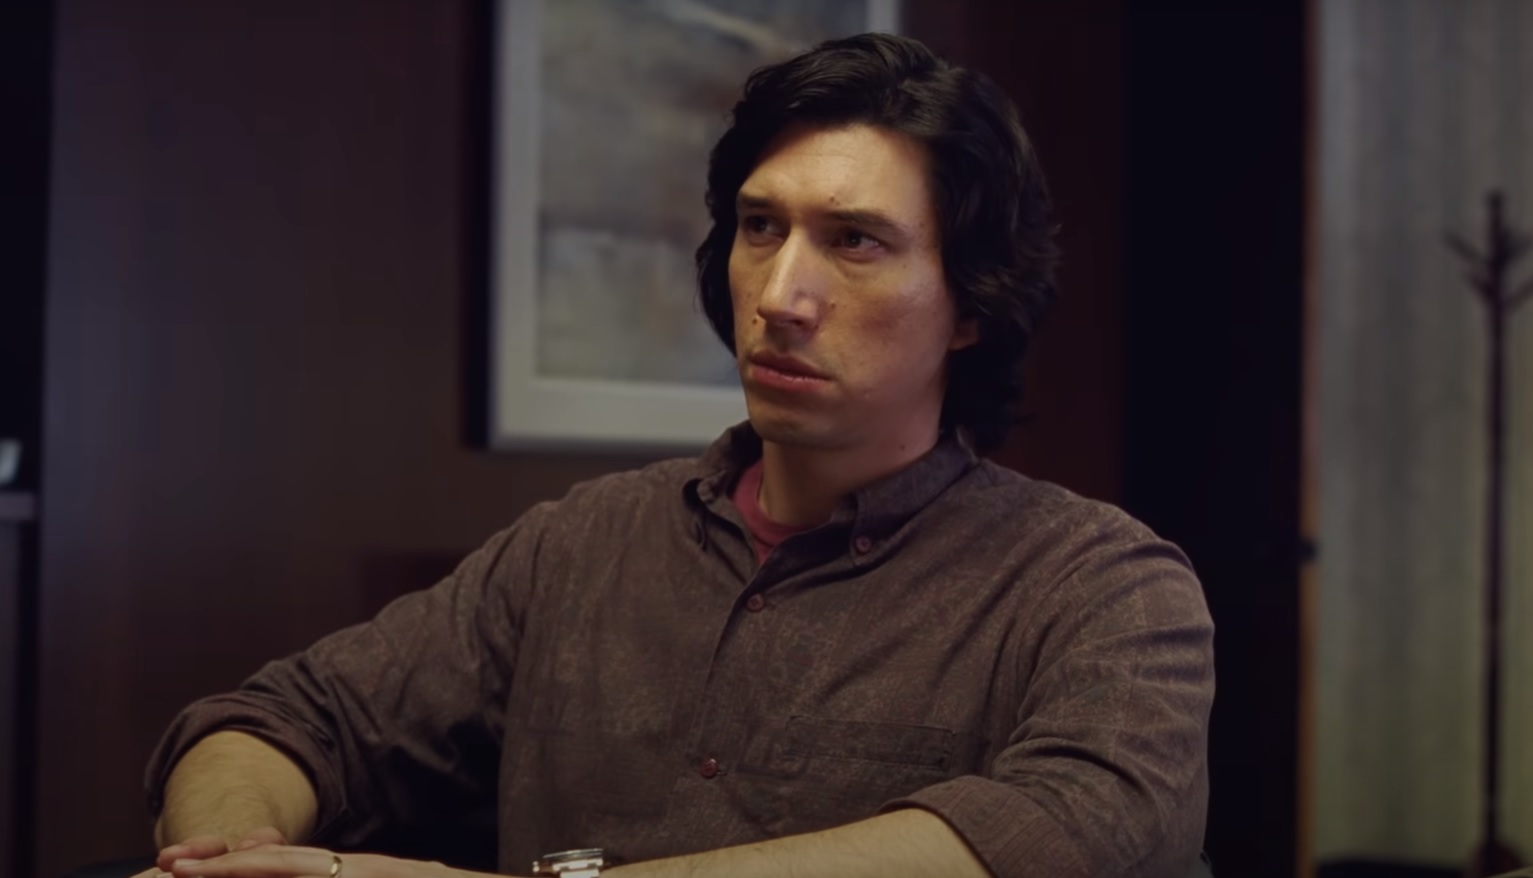 Adam Driver: All New Movies Coming Out in 2023 and 2024